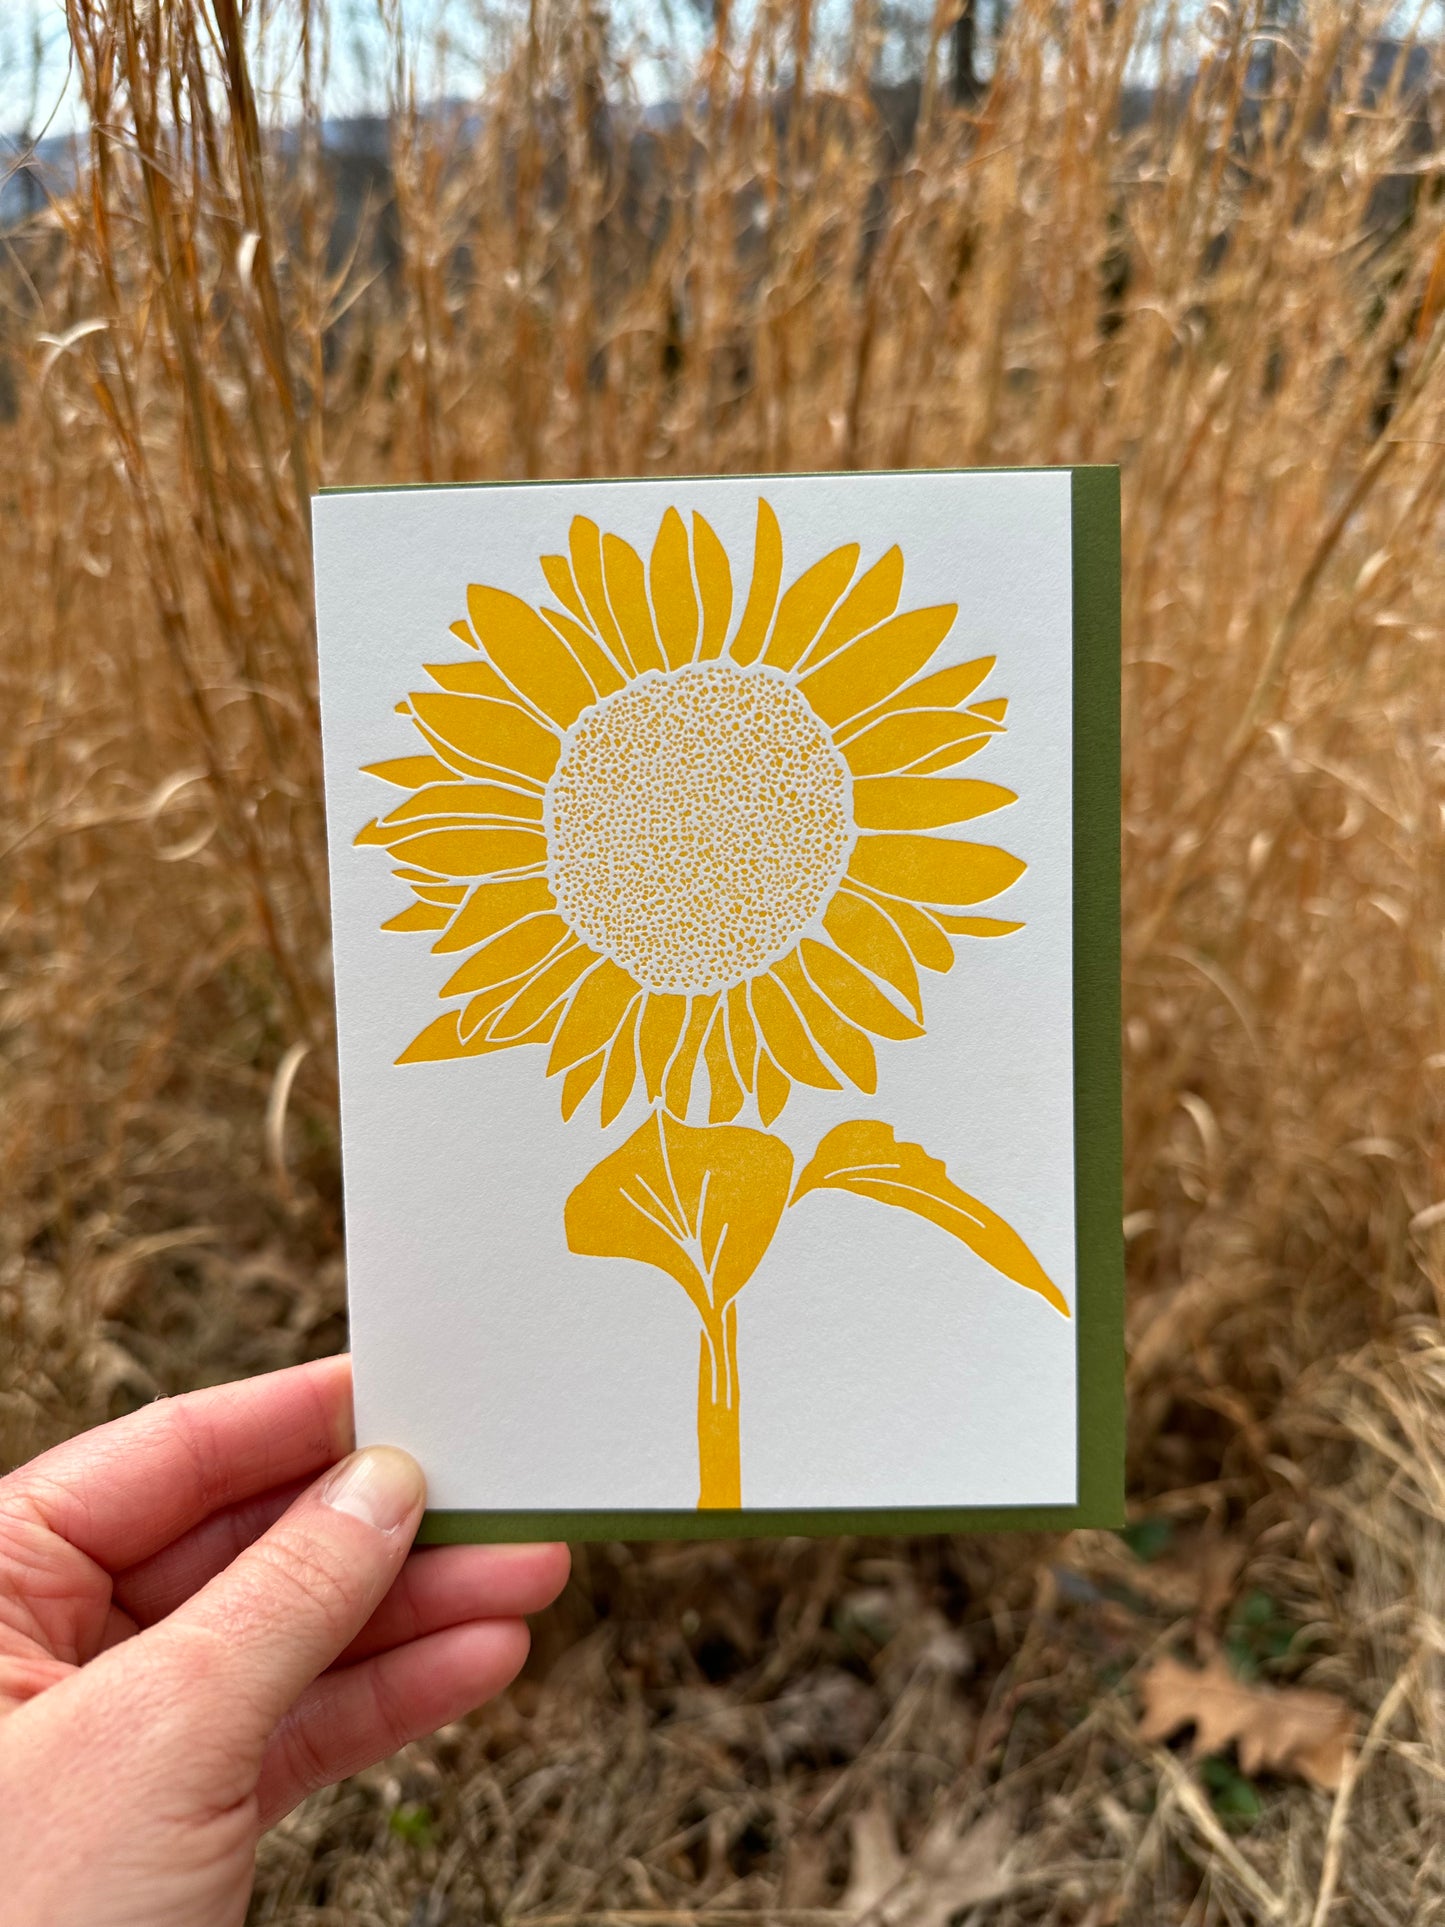 Letterpress greeting card featuring a cheeful Sunflower, printed in a vibrant golden-yellow ink. There is no text on the card. The white card is 100% cotton, blank inside, and is paired with a rich green envelope. Card is shown outside in a grassy field in late winter. 